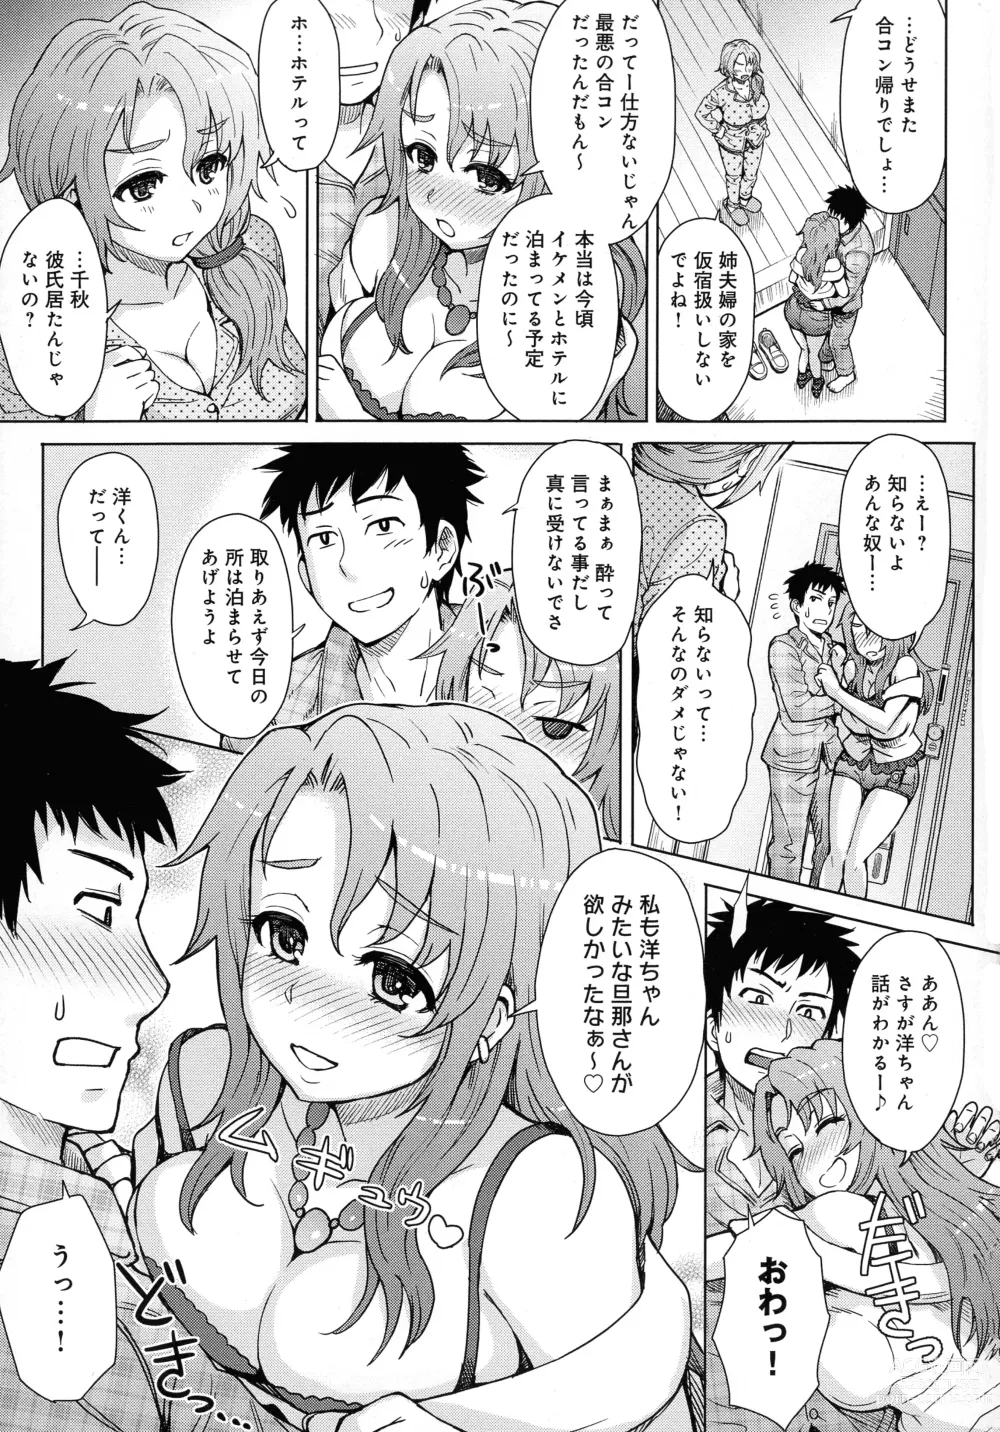 Page 3 of doujinshi Shared Love